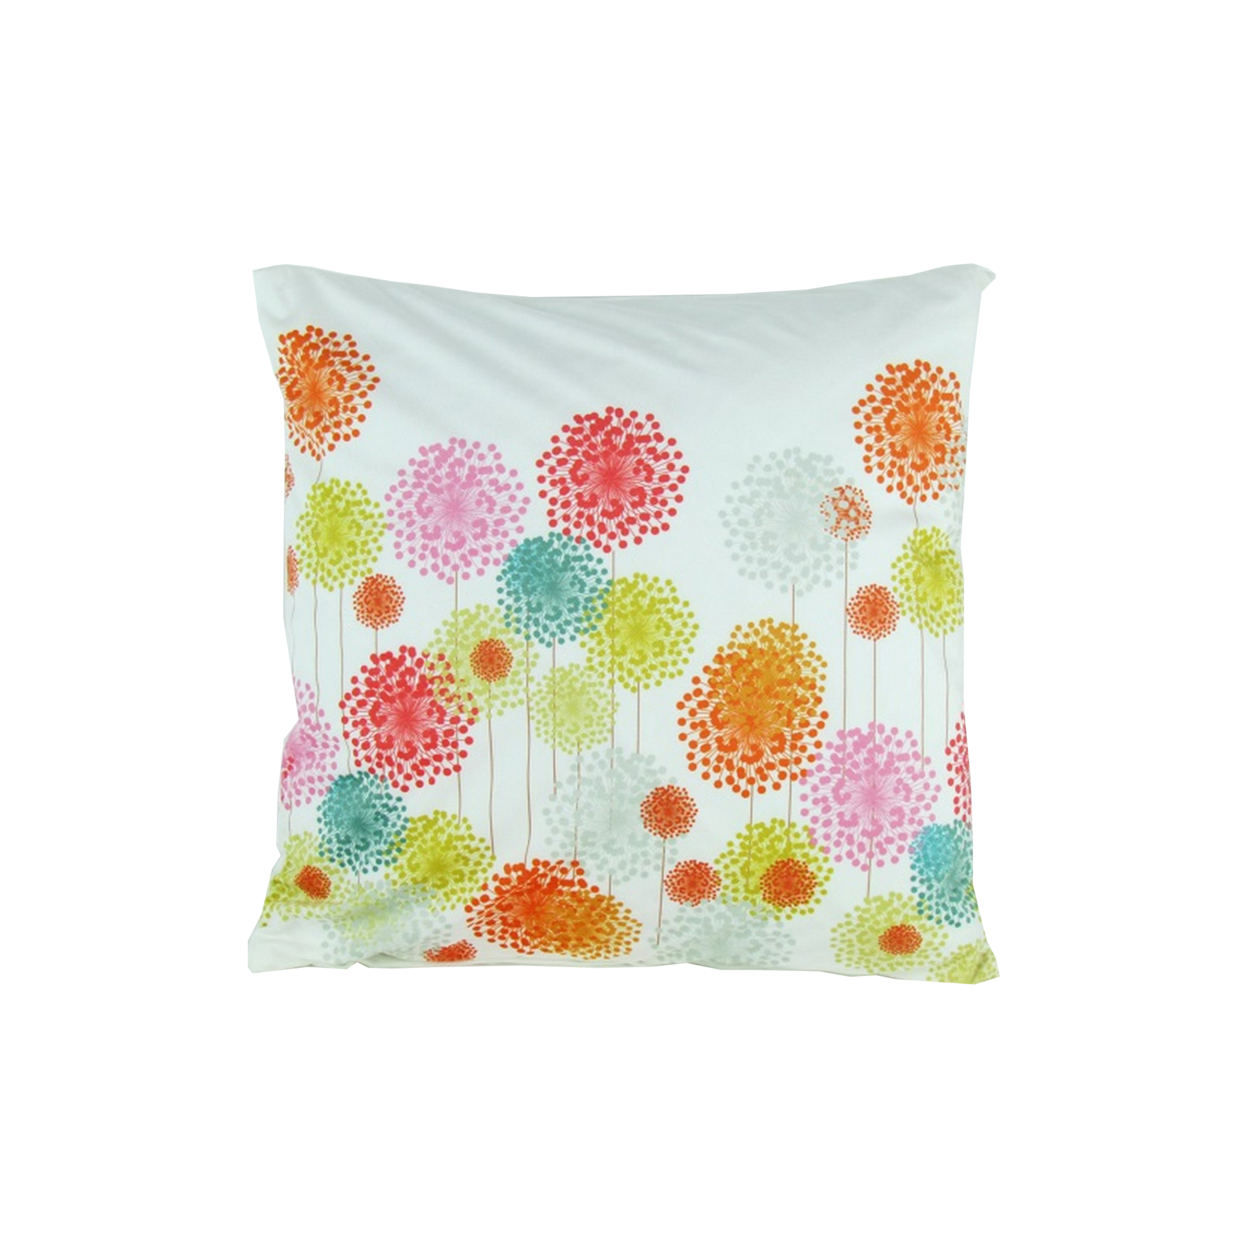 Fabric Accent Pillow With Floral Pattern, Multicolor- Saltoro Sherpi